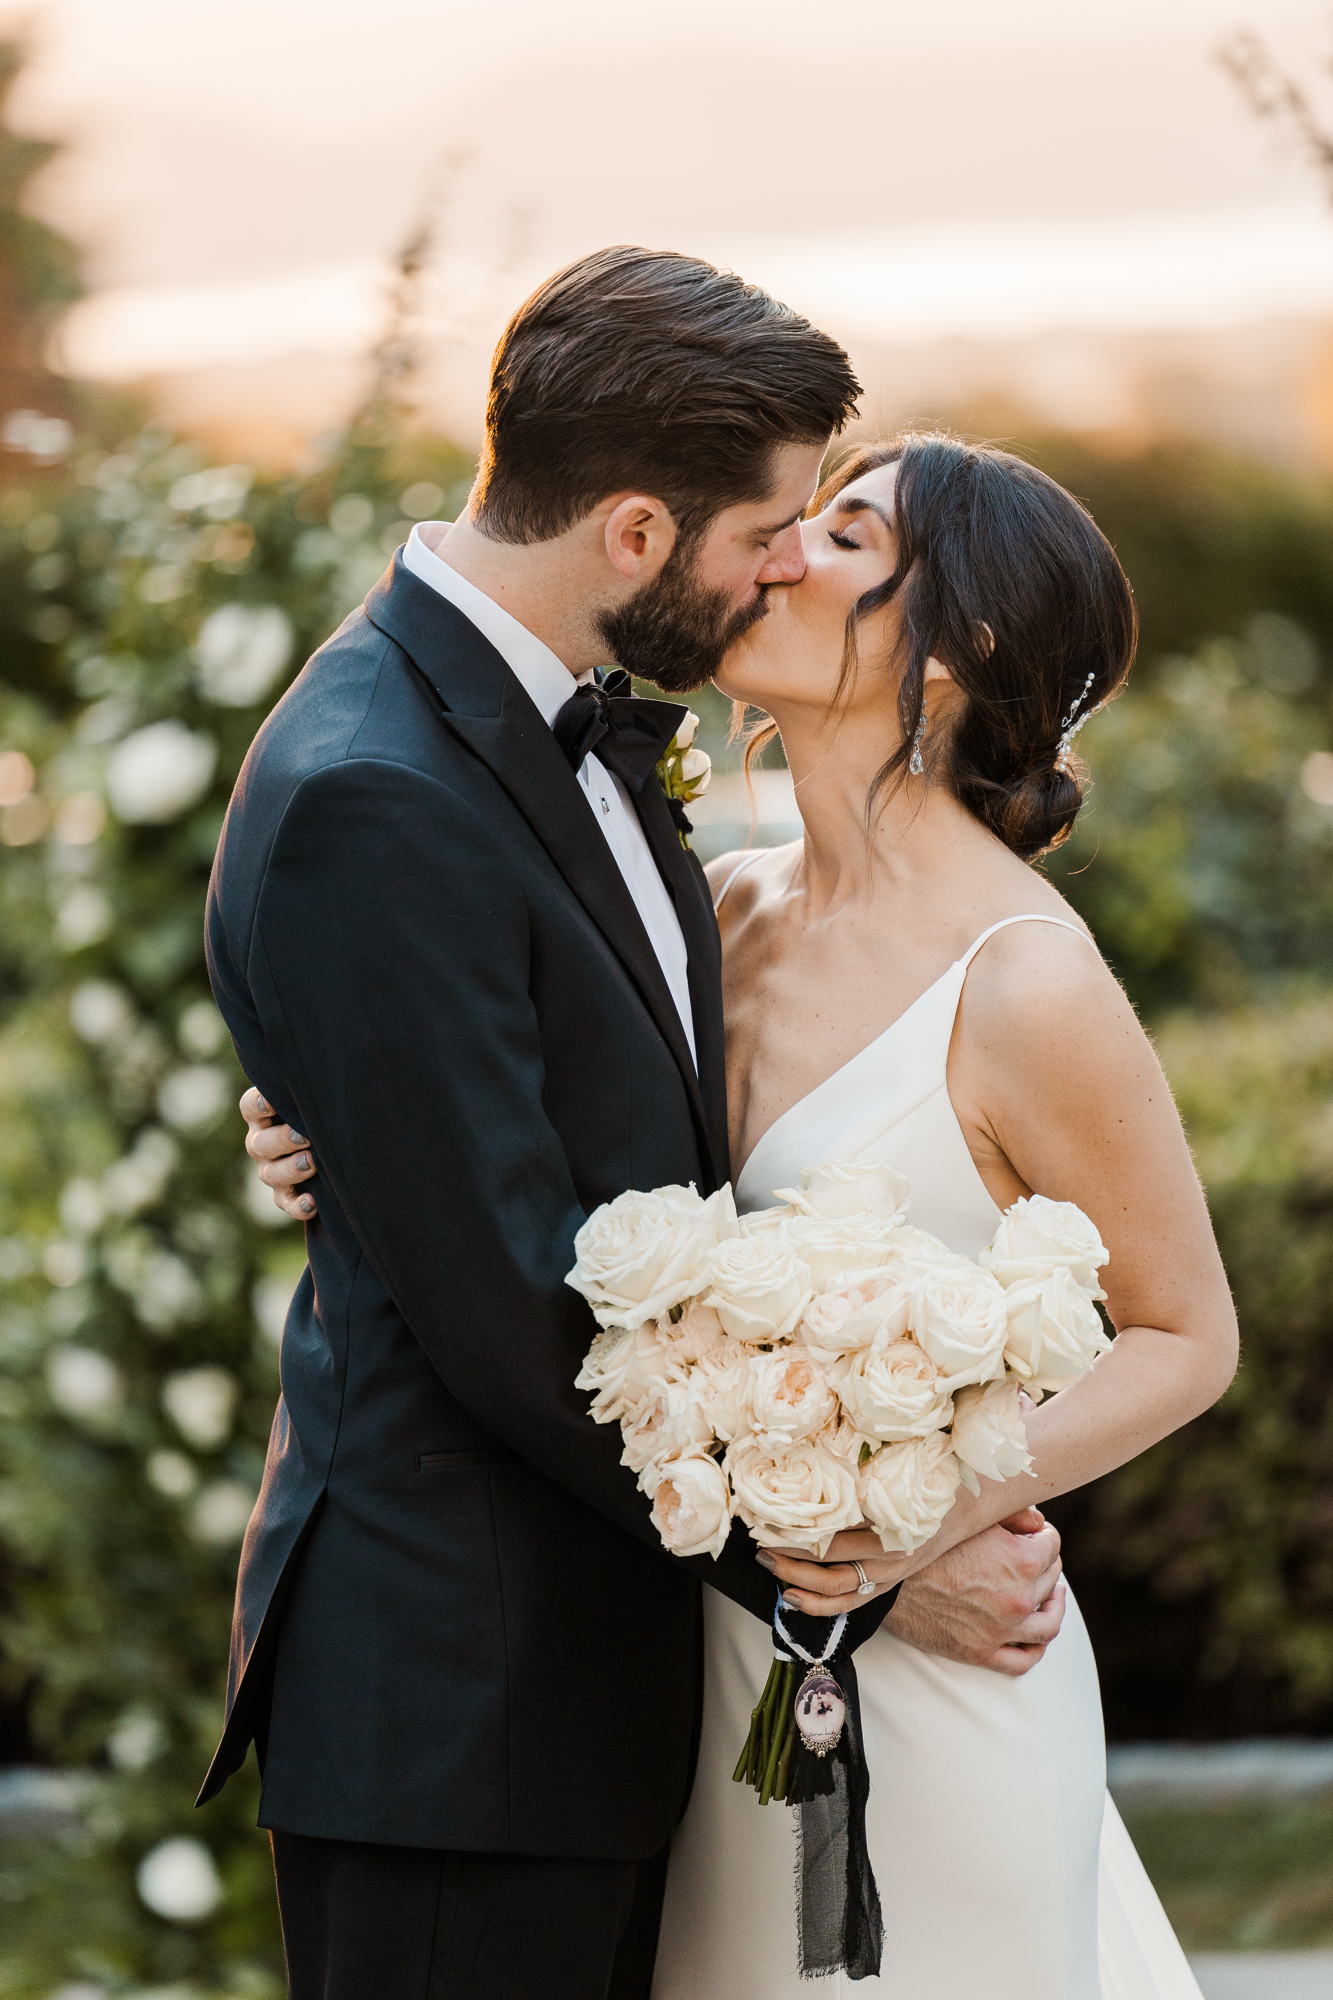 Flawless Sunset Briarcliff Manor Wedding Photos in Autumn in Hudson Valley